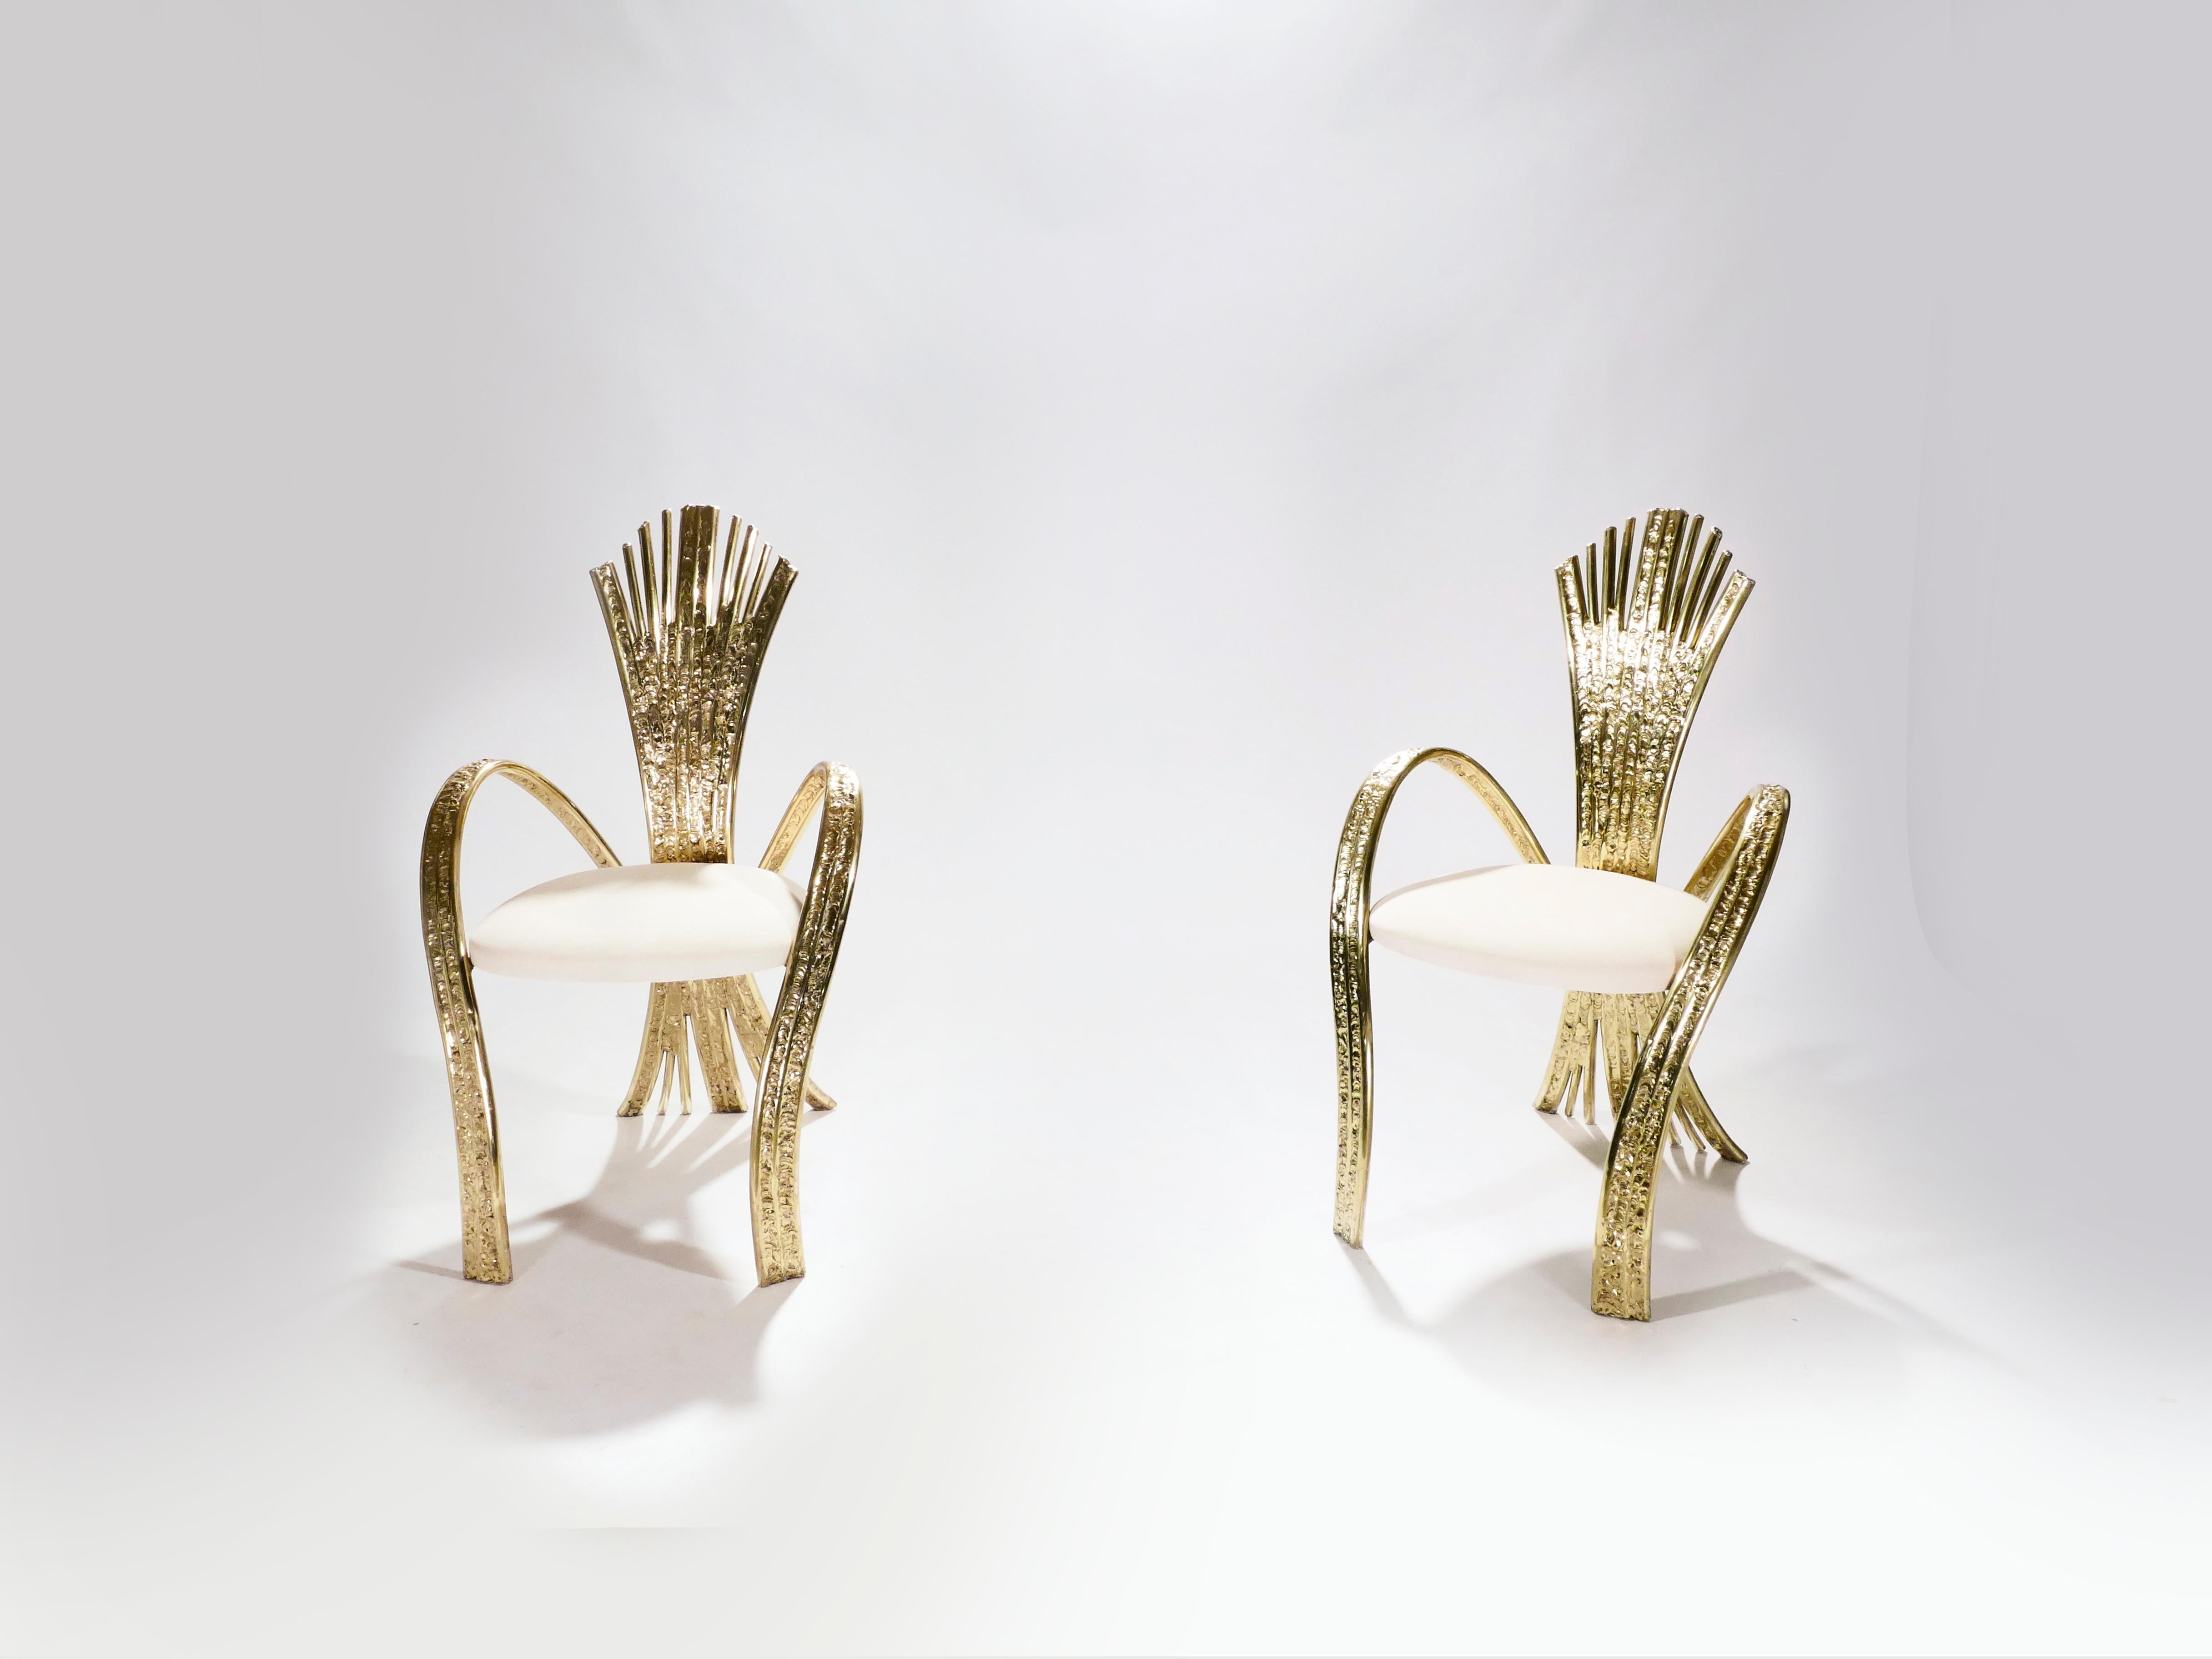 Here’s a standout pair of chairs signed by the French designer, though some might prefer to call him a sculptor foremost, Jacques Duval-Brasseur. Duval-Brasseur is known for his pieces that seem to carry a life-force within them, and these chairs